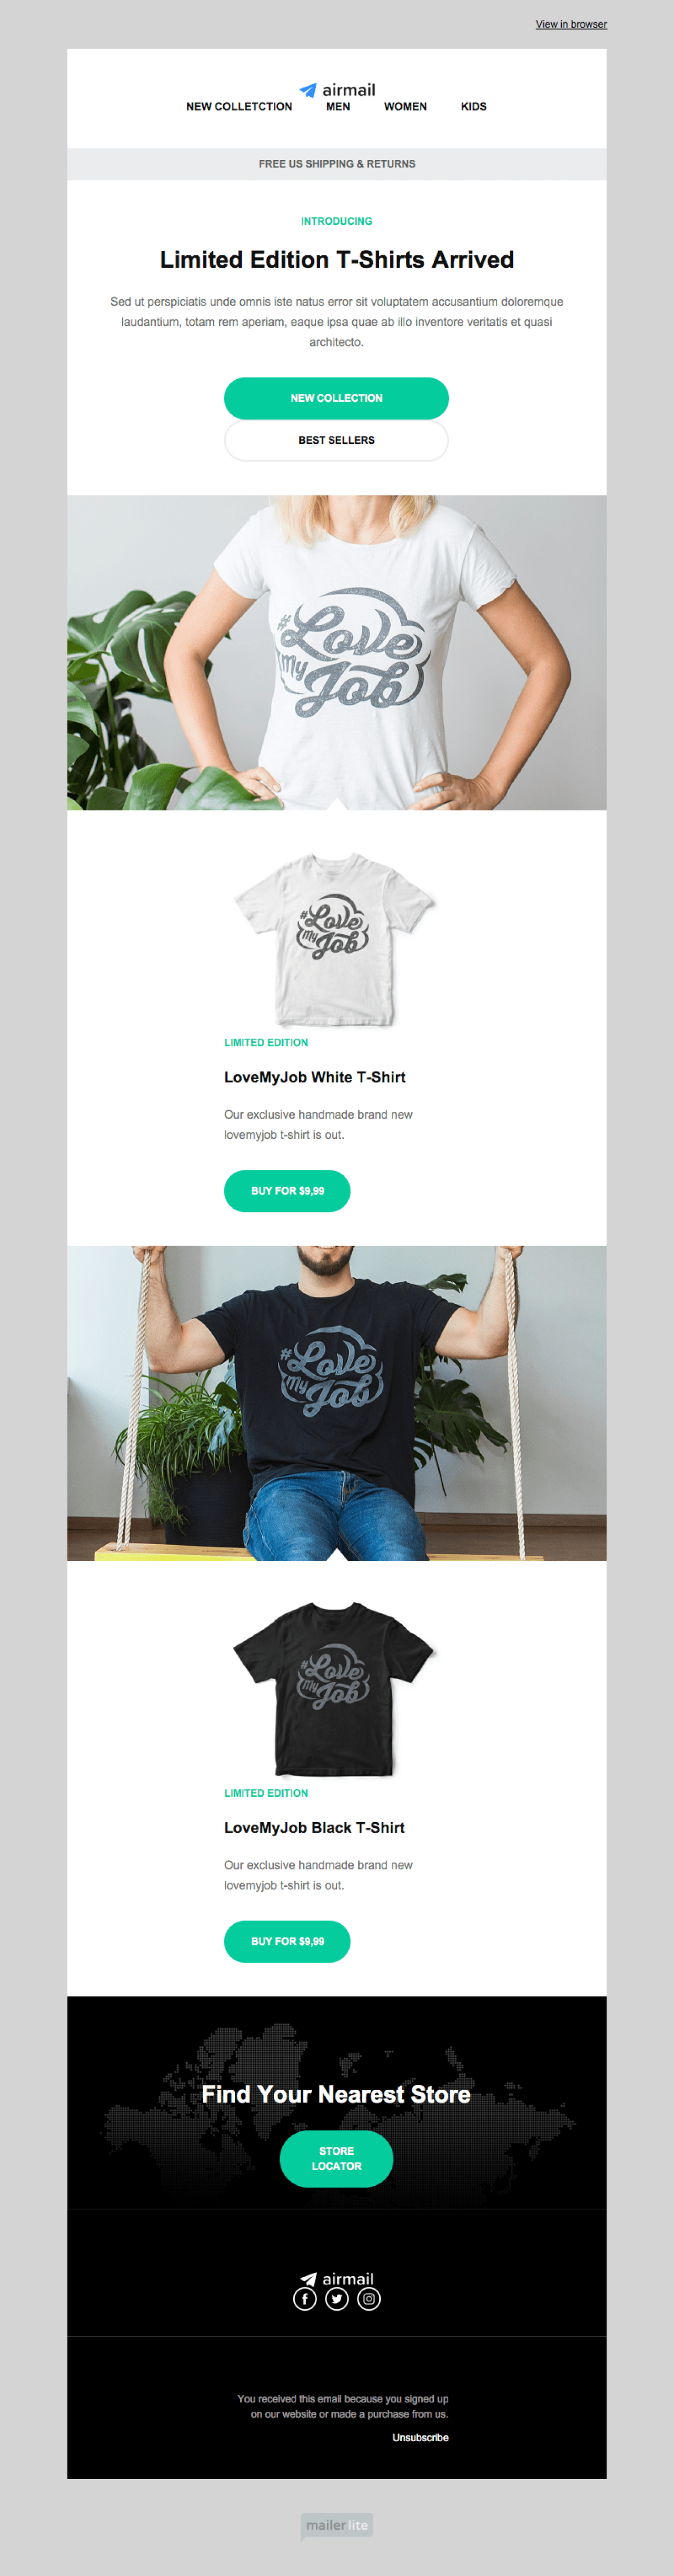 E-commerce #2 example - Made with MailerLite